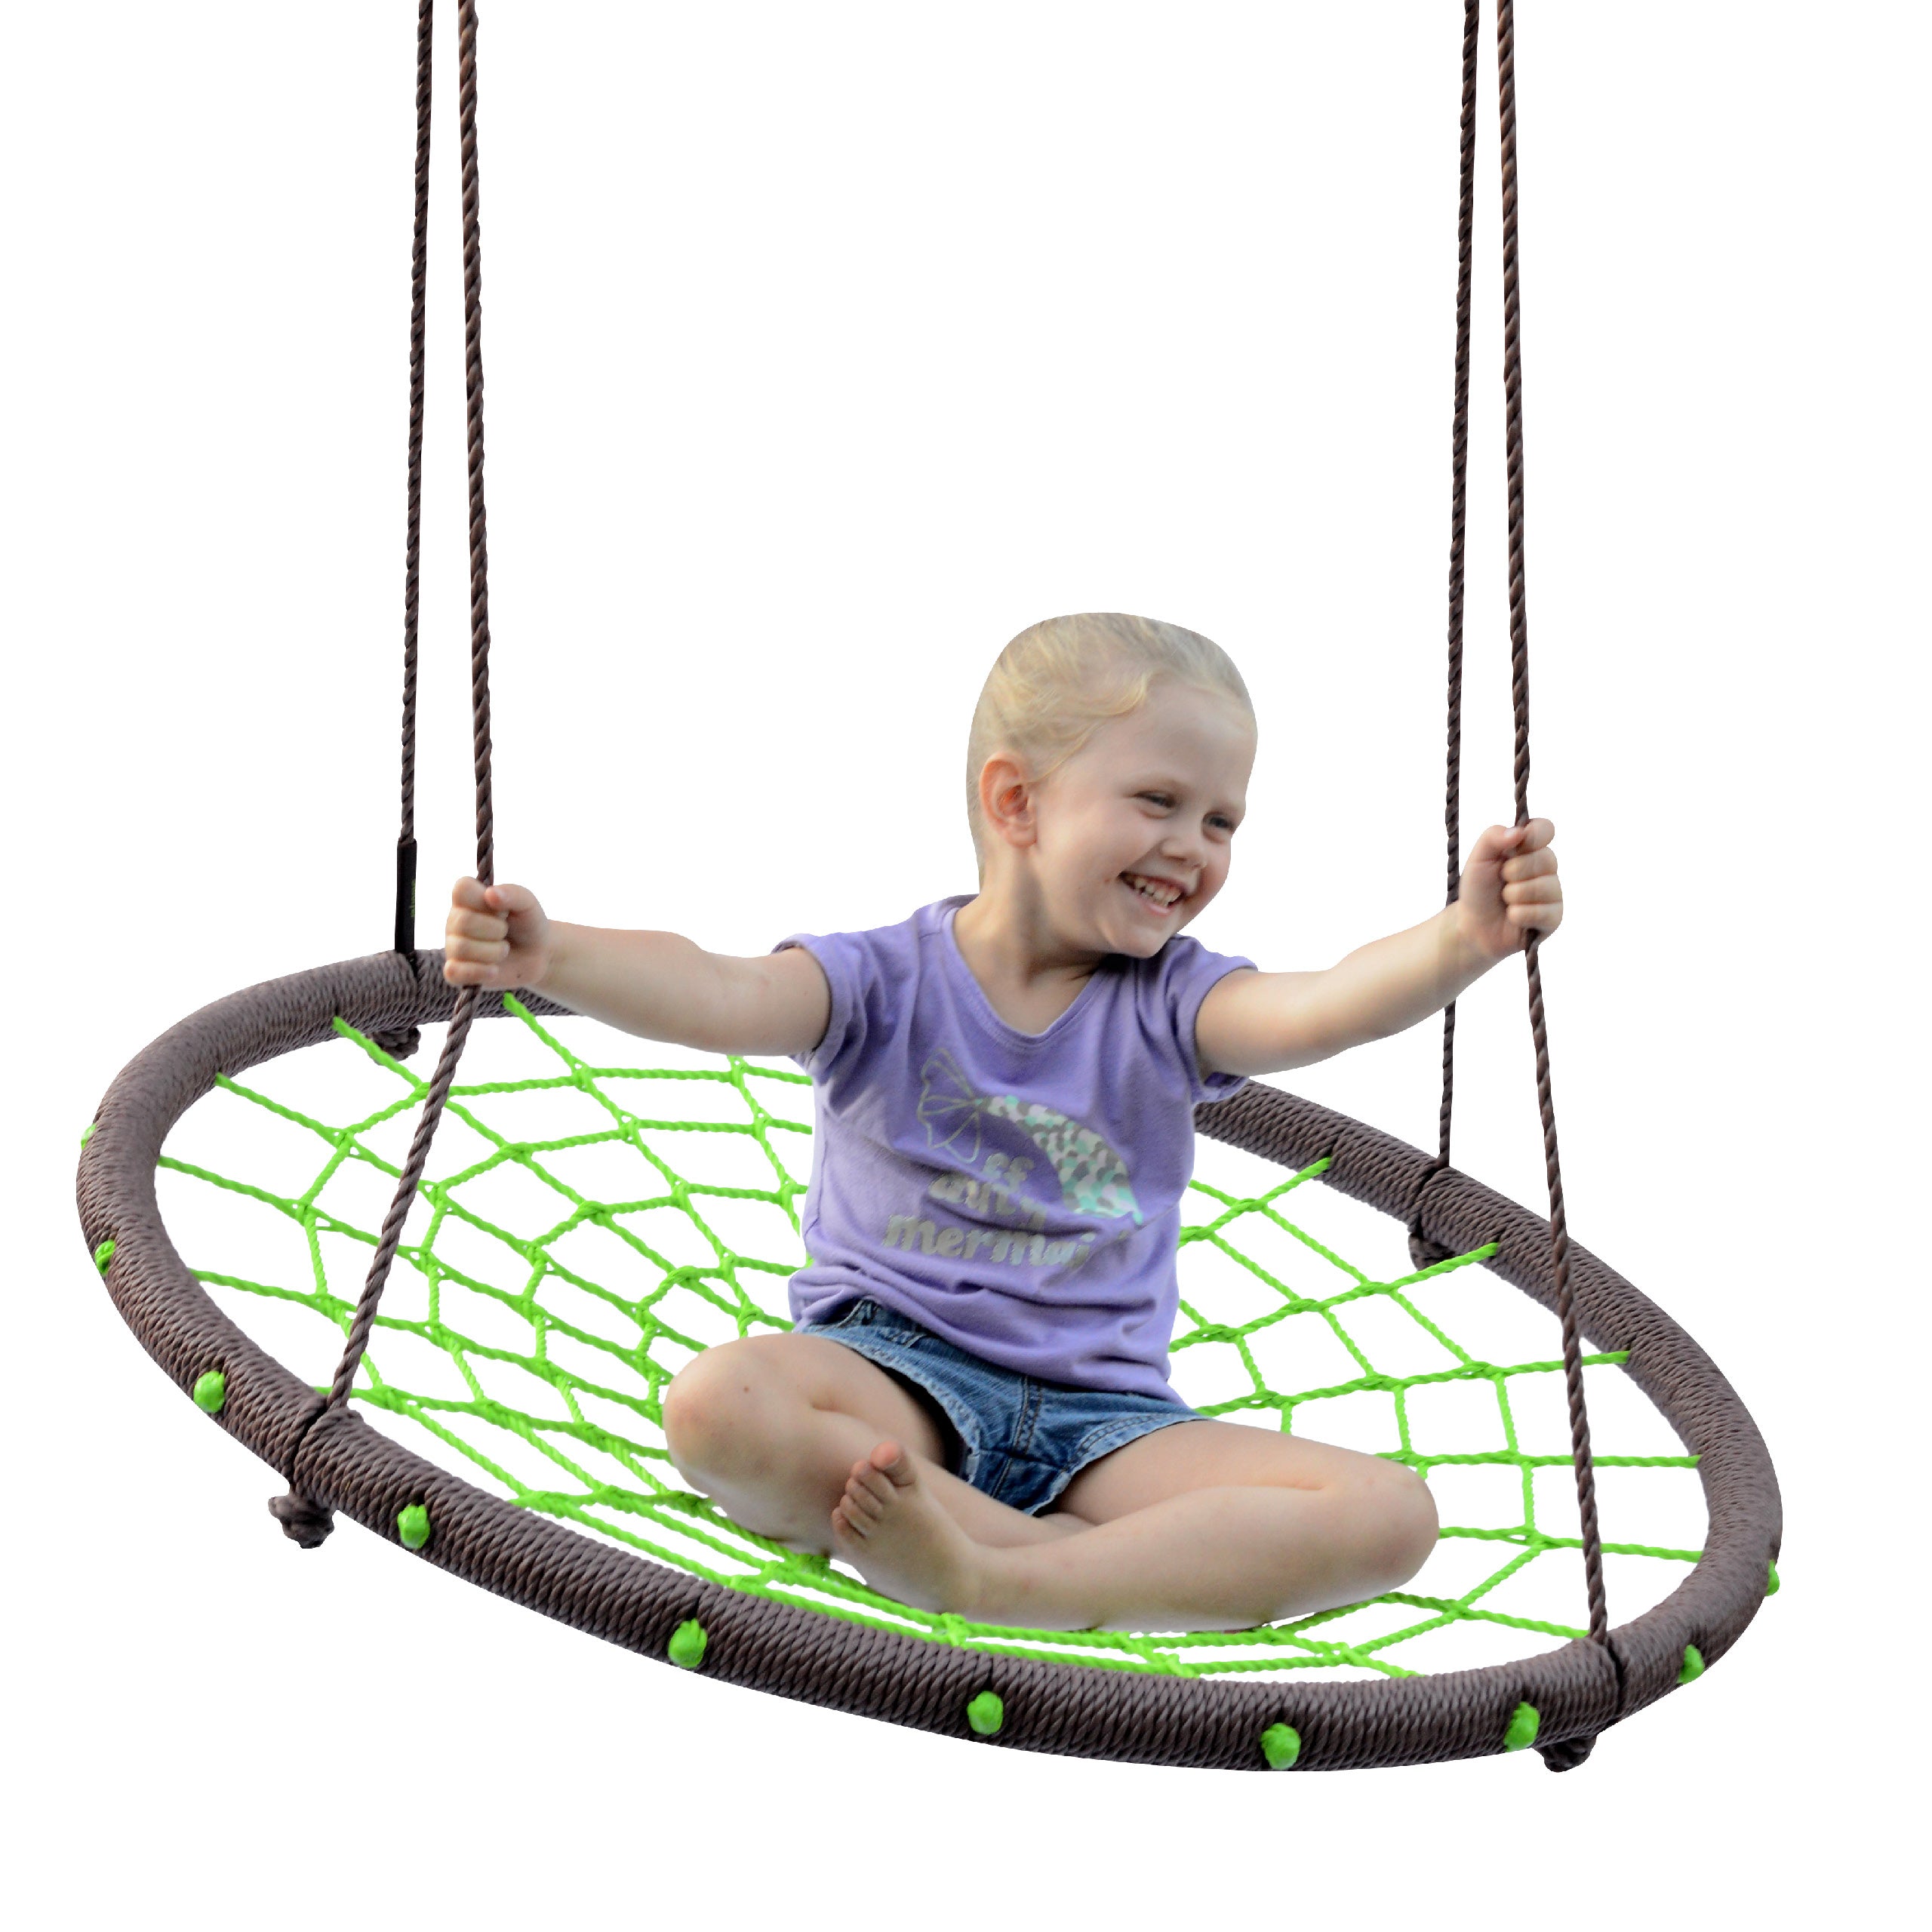 40" Spider Rider Woven Rope Web Swing, Hold up to 4 Kids